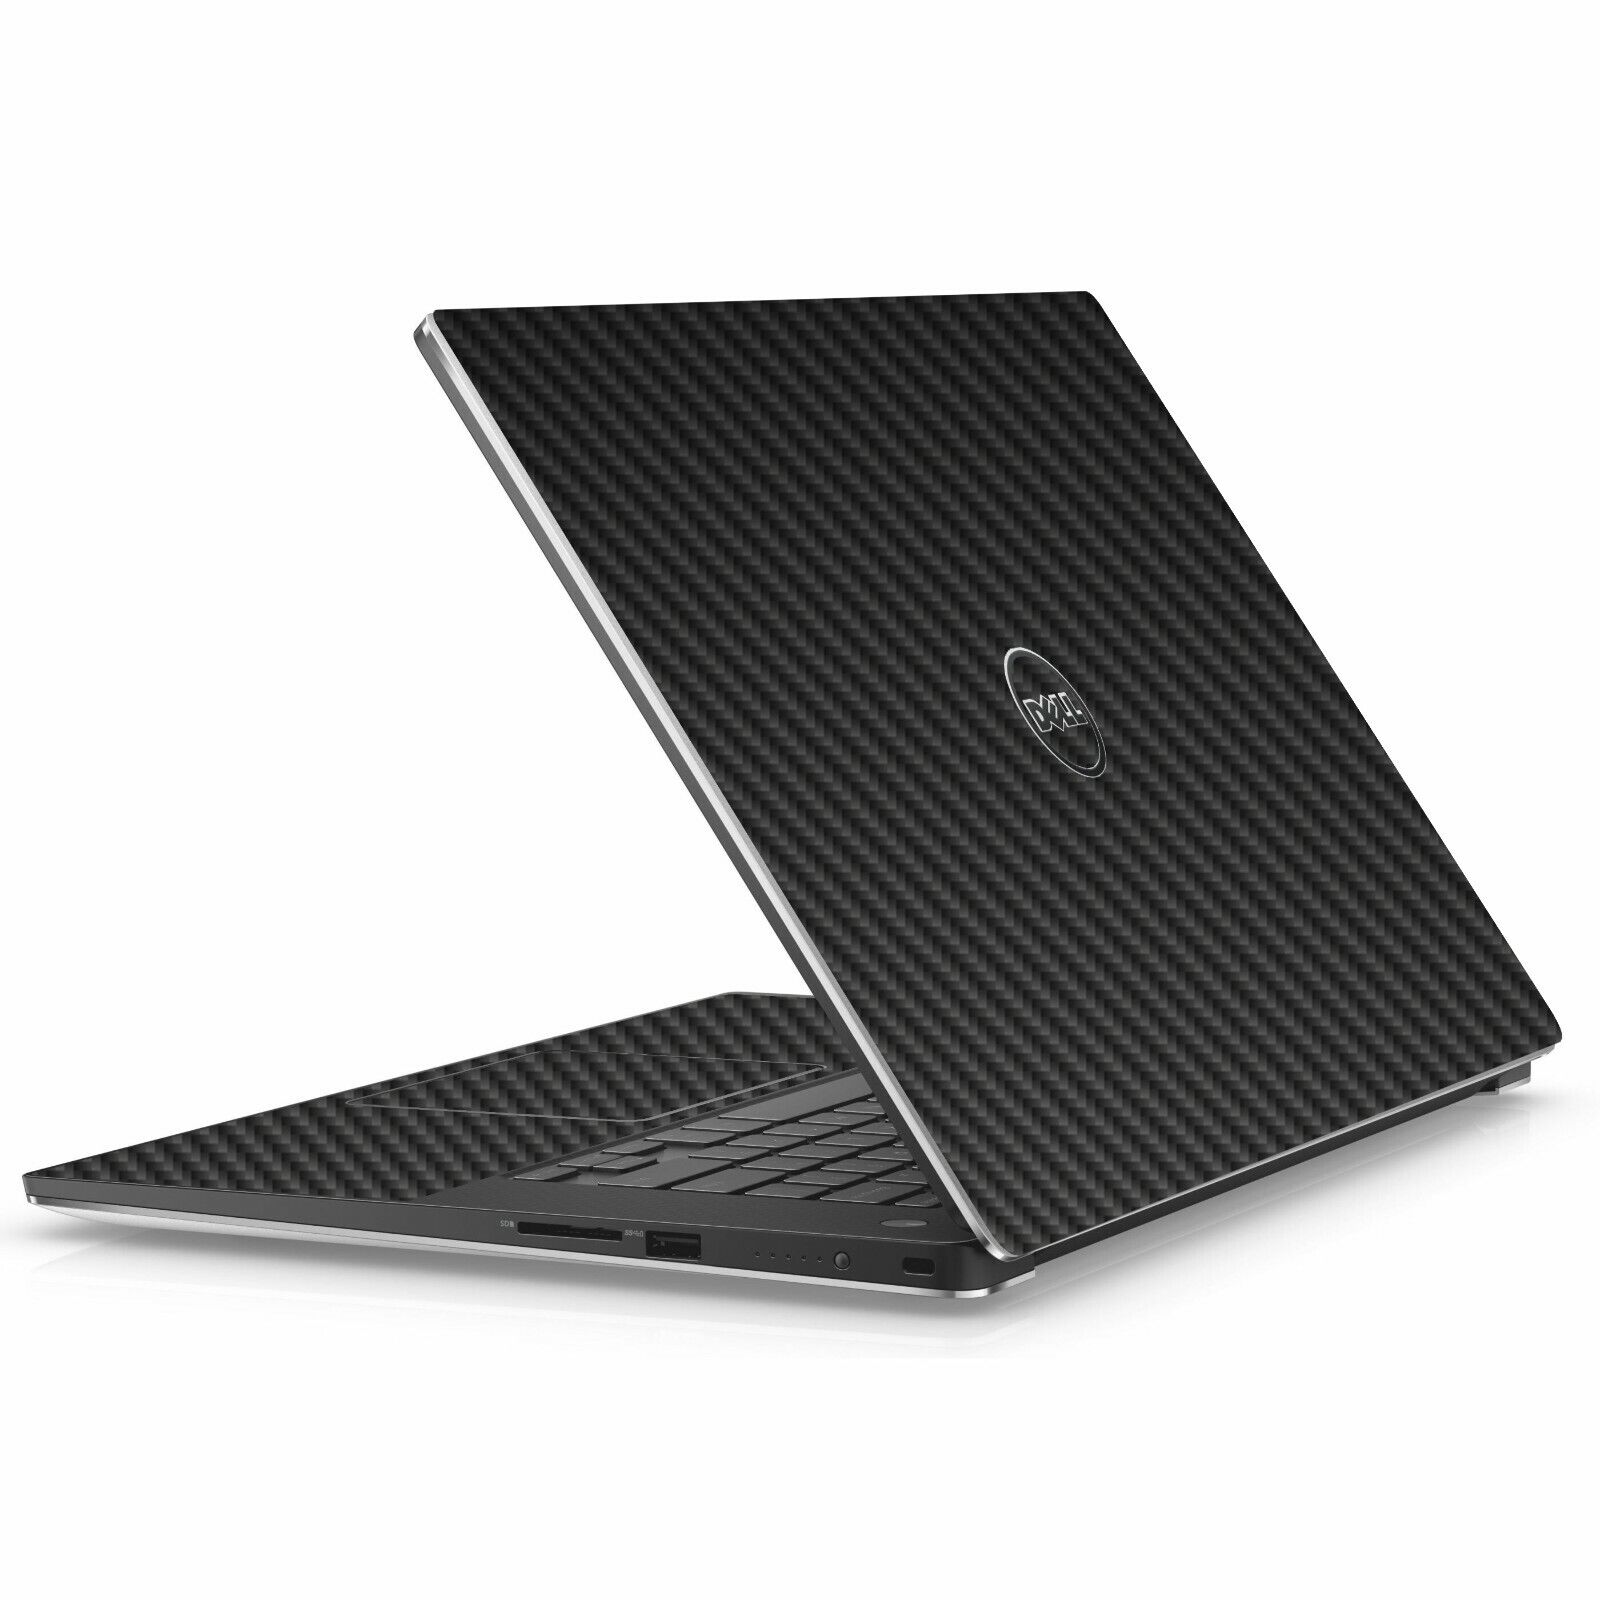 LidStyles Carbon Fiber Laptop Skin Protector Decal Dell Precision 5510 / 5520